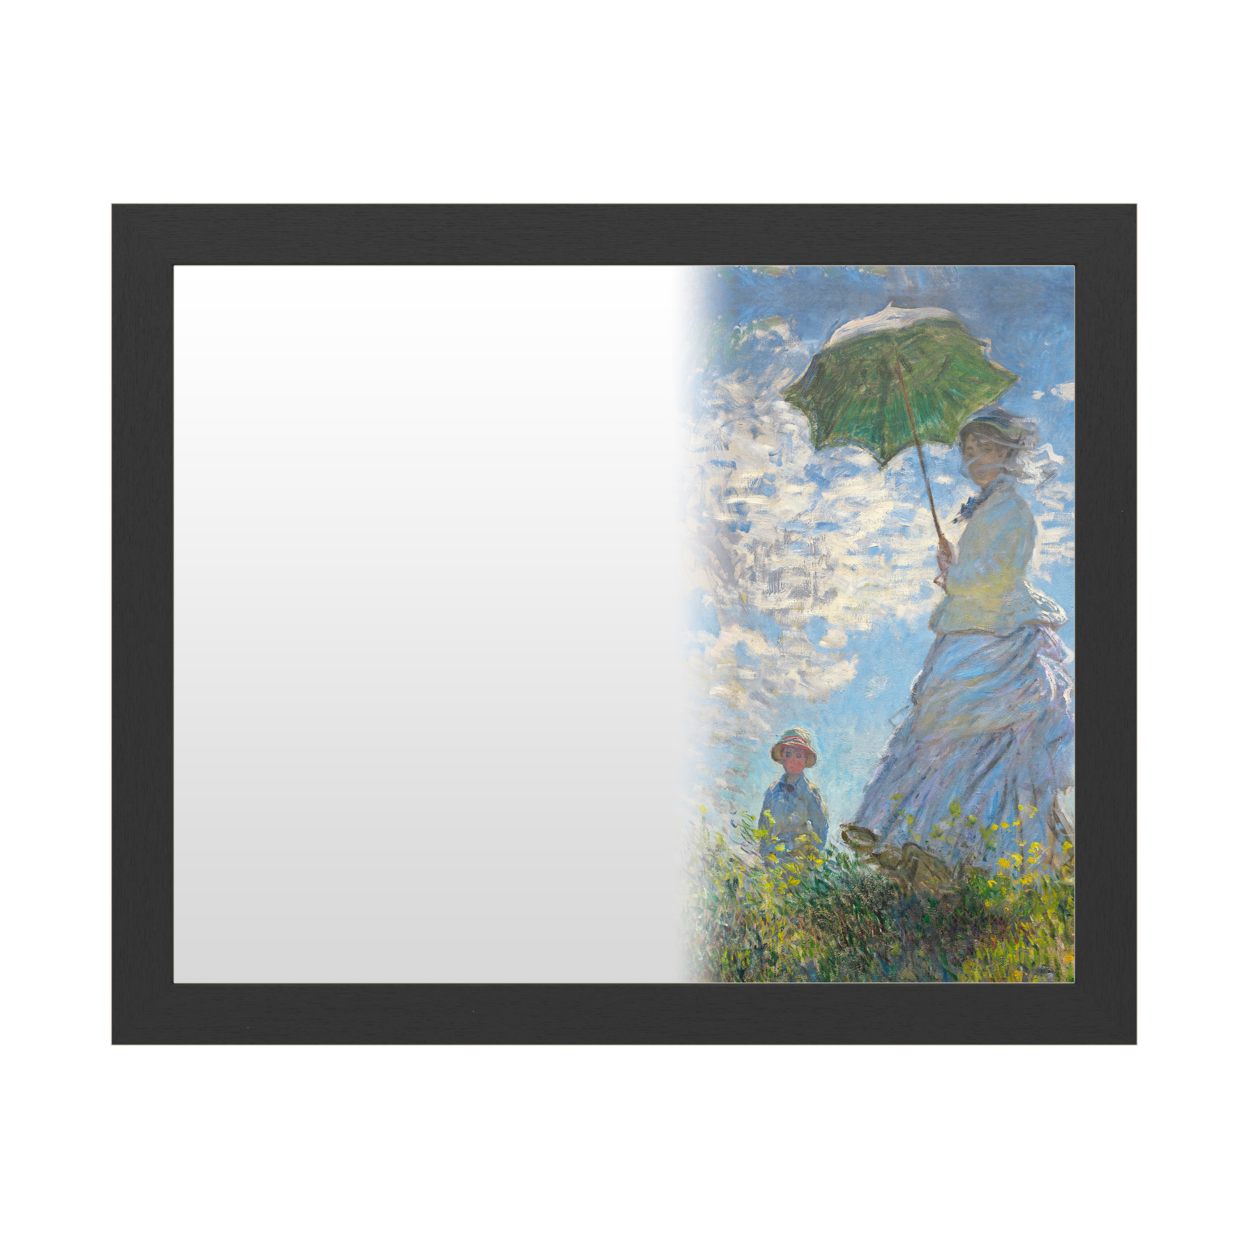 Dry Erase 16 X 20 Marker Board With Printed Artwork - Claude Monet Woman With A Parasol 1875 White Board - Ready To Hang